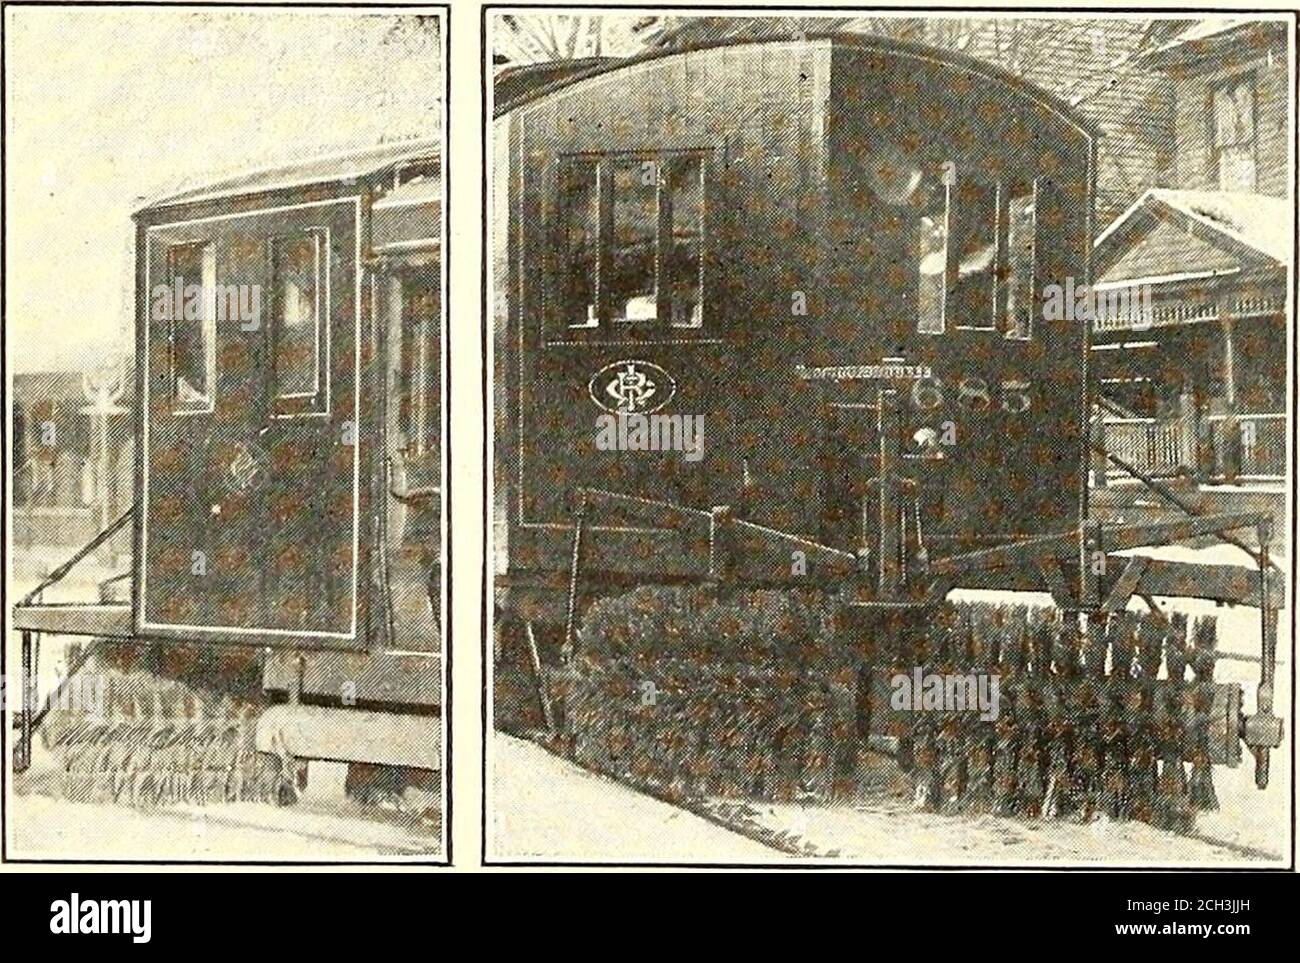 Electric railway journal . outpractically and would enable the rolling  stock to beused to better advantage than otherwise. It was decided to use four  fourteen-bench cars whichoperate on the belt lines